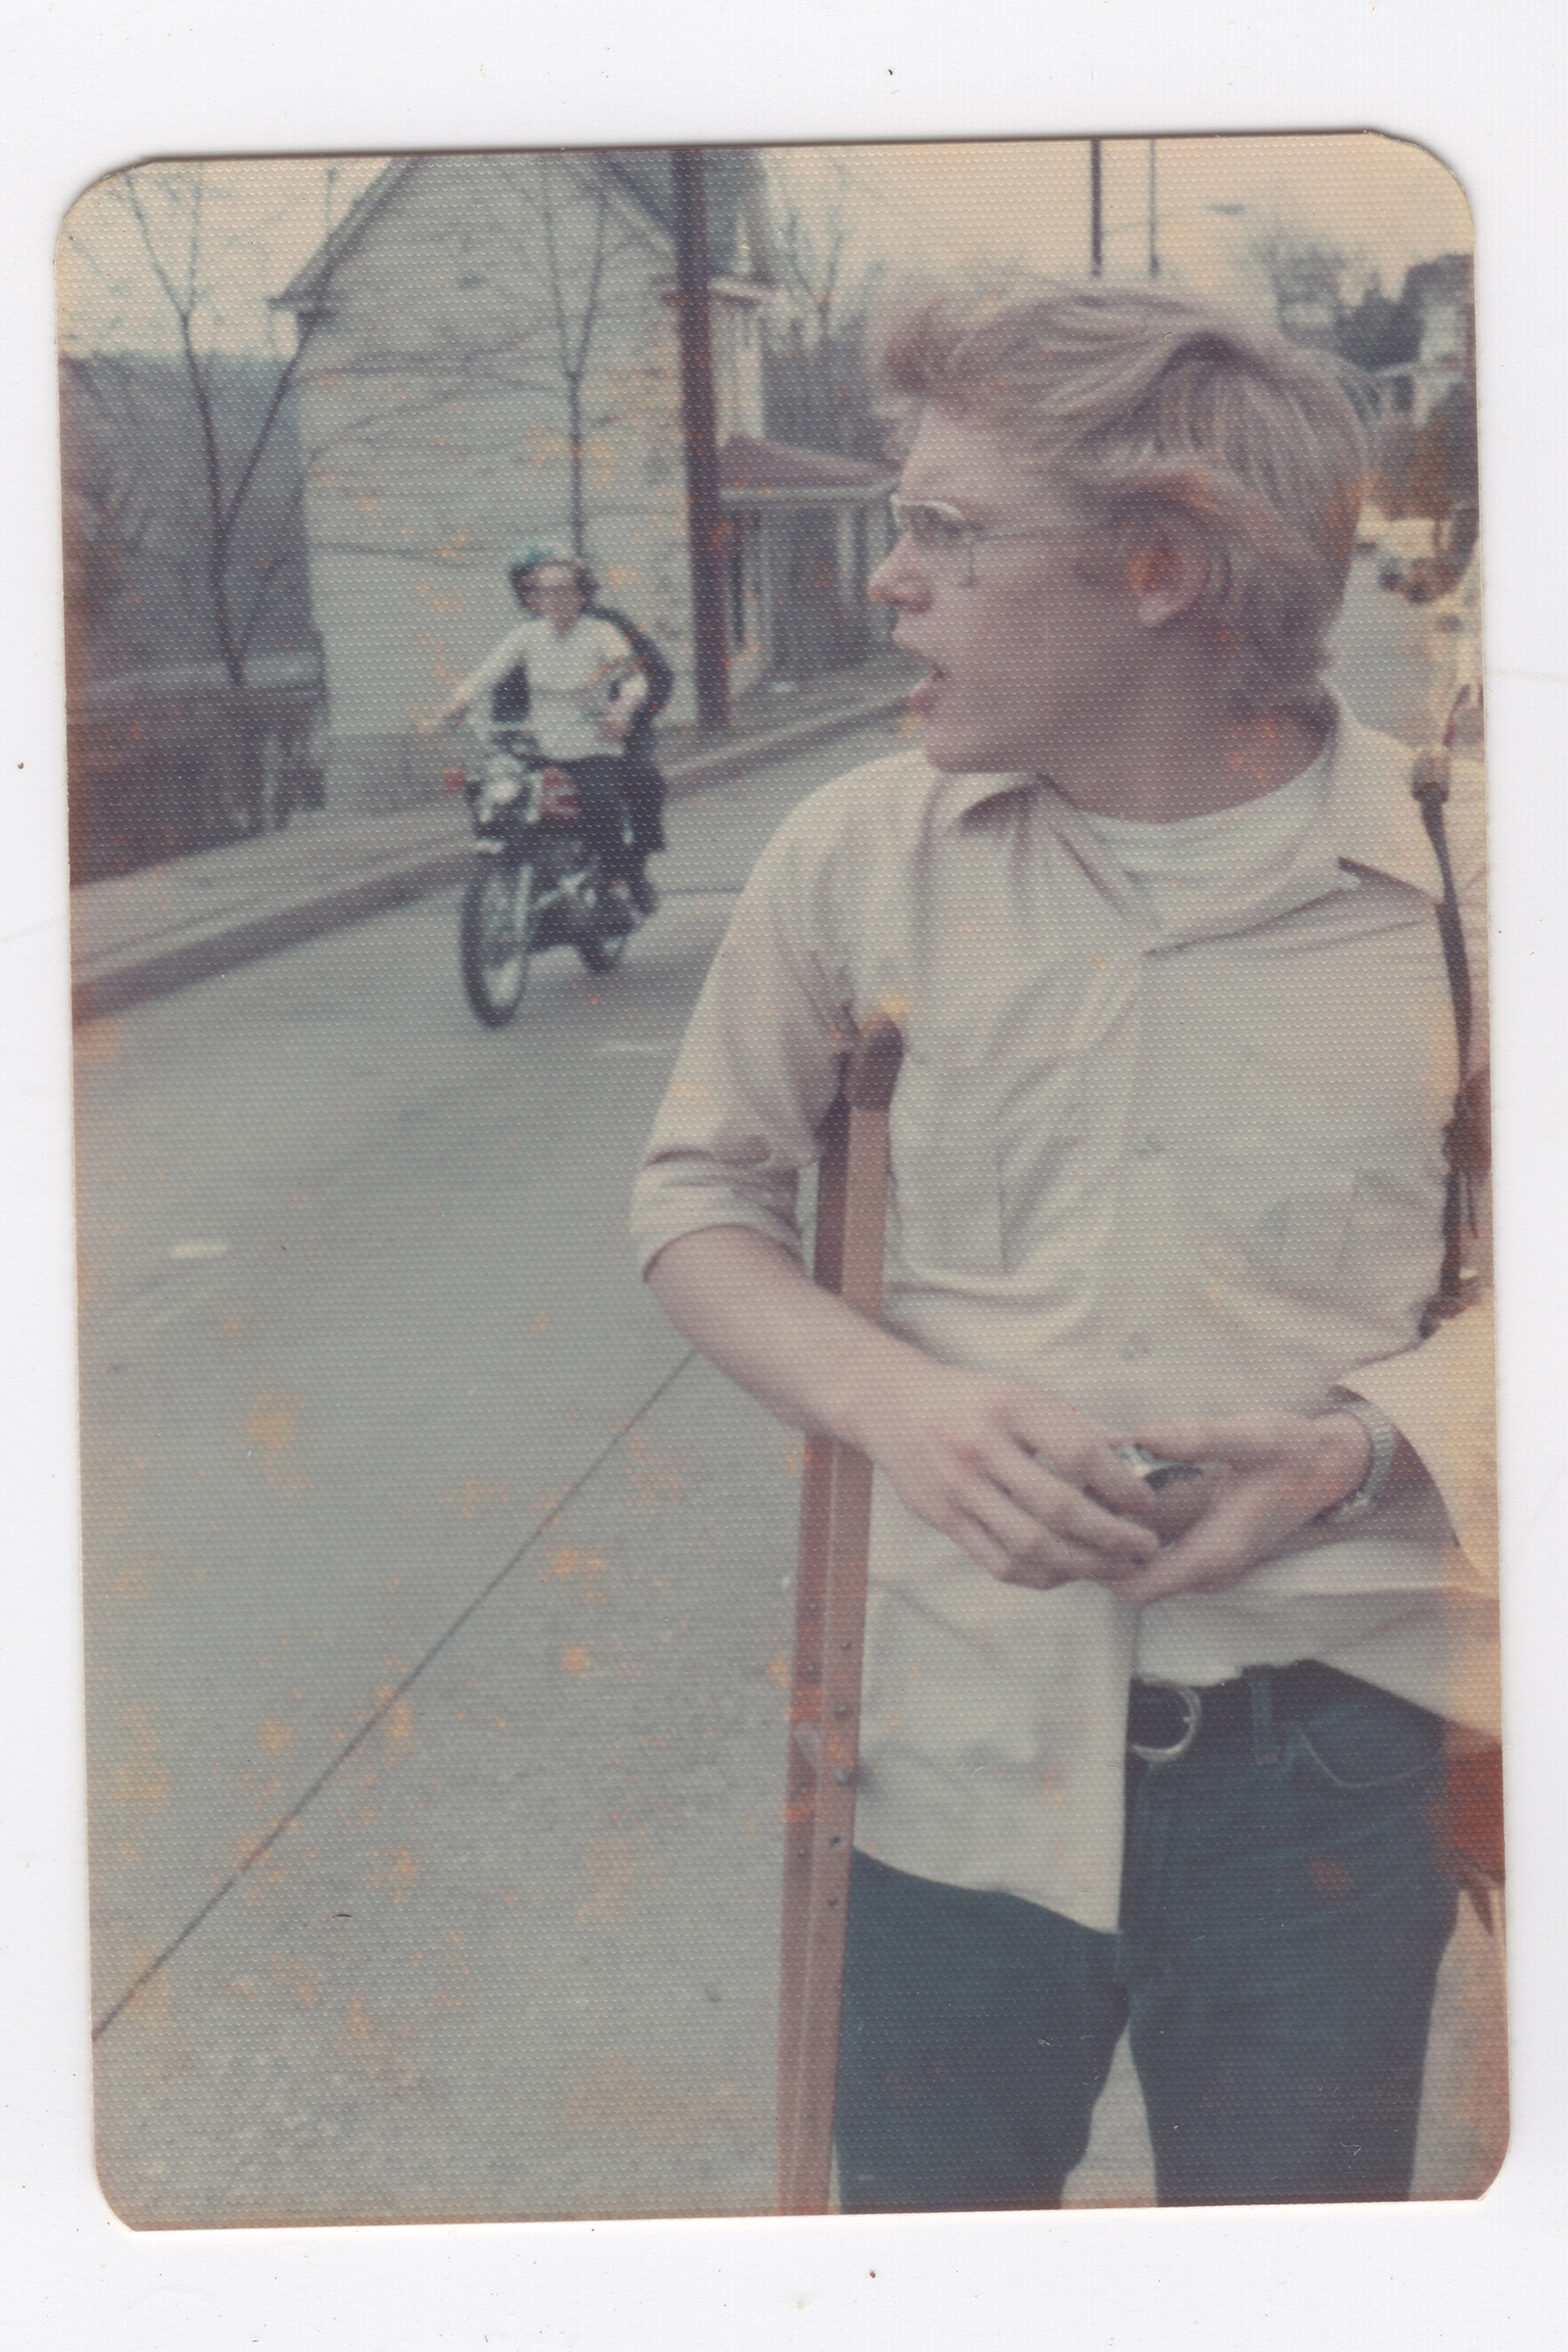 Bicycle Bill on crutches – Pittsburgh, PA – 1971